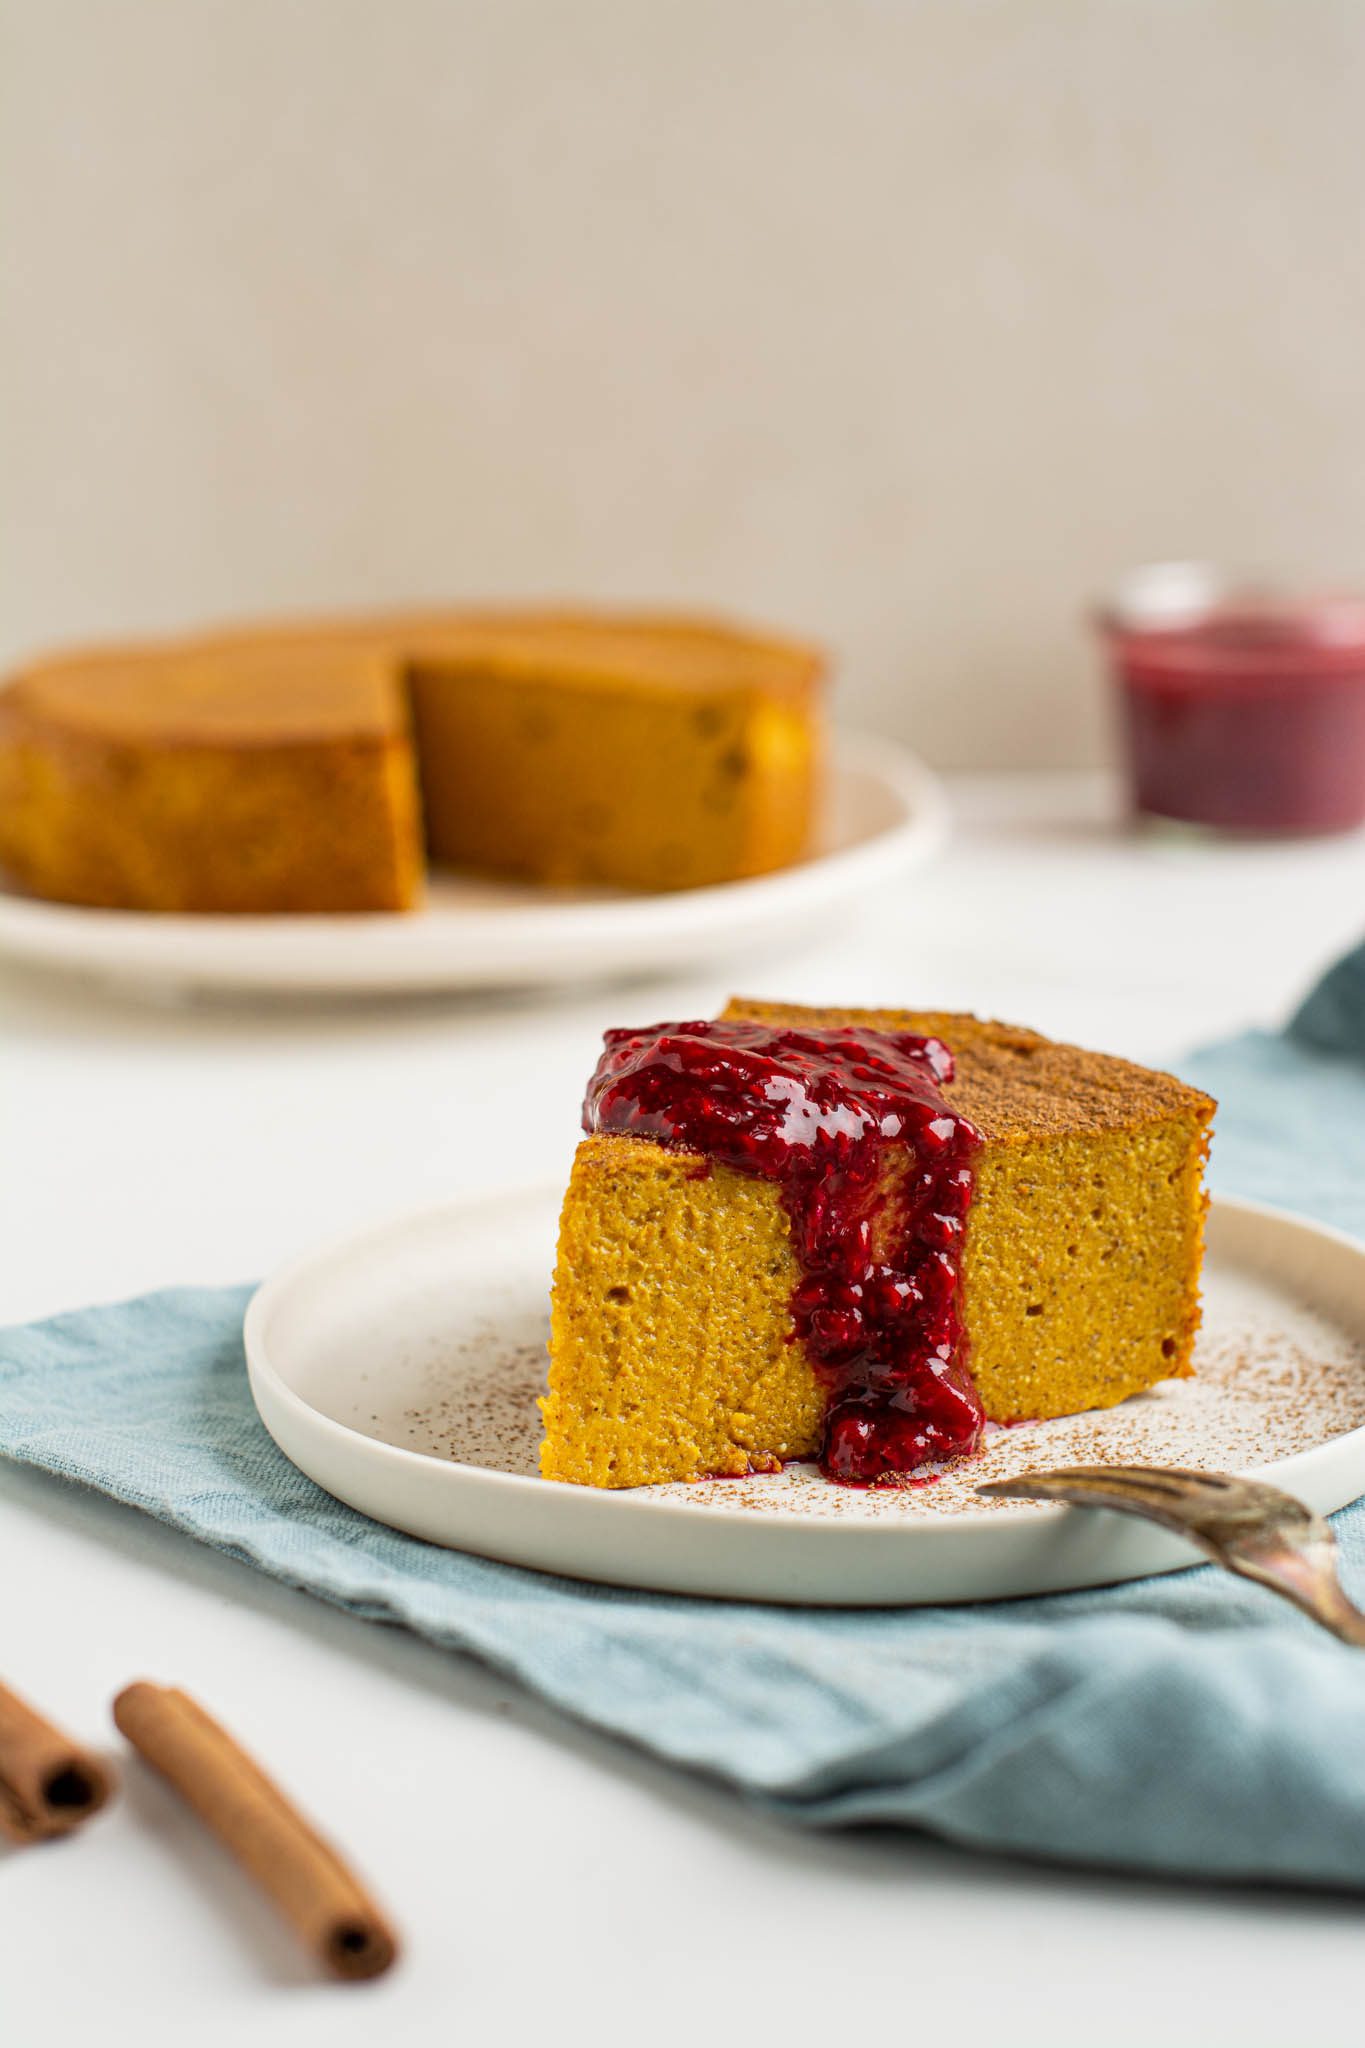 Delicious and healthy vegan pumpkin cheesecake with a silky-smooth texture. It is low-glycemic, gluten-free, oil-free and refined sugar free. Make it with it without crust.